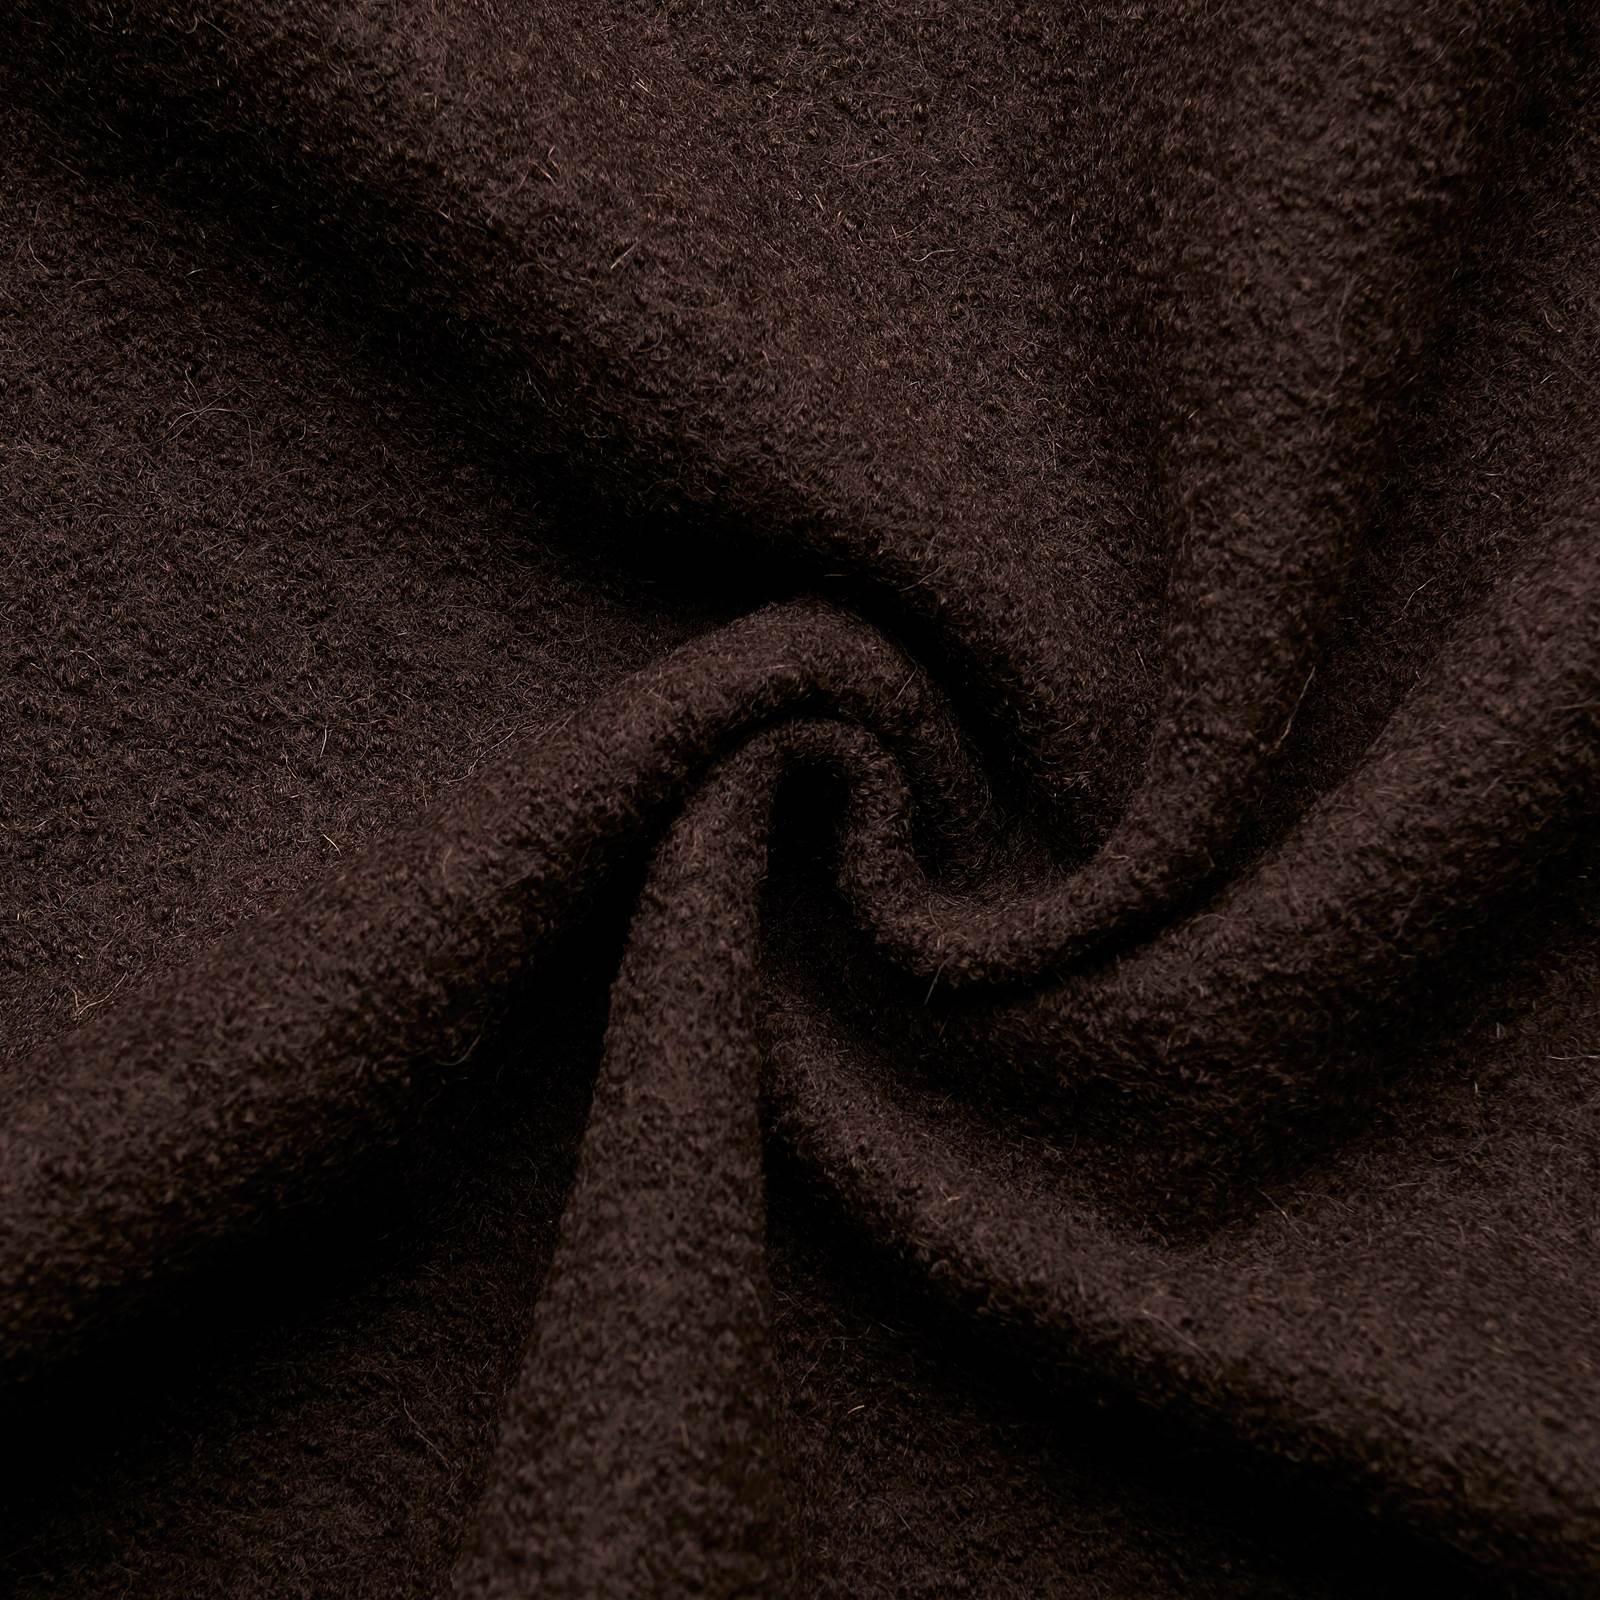 FAVORIT Walkloden - boiled wool / loden - chocolate brown